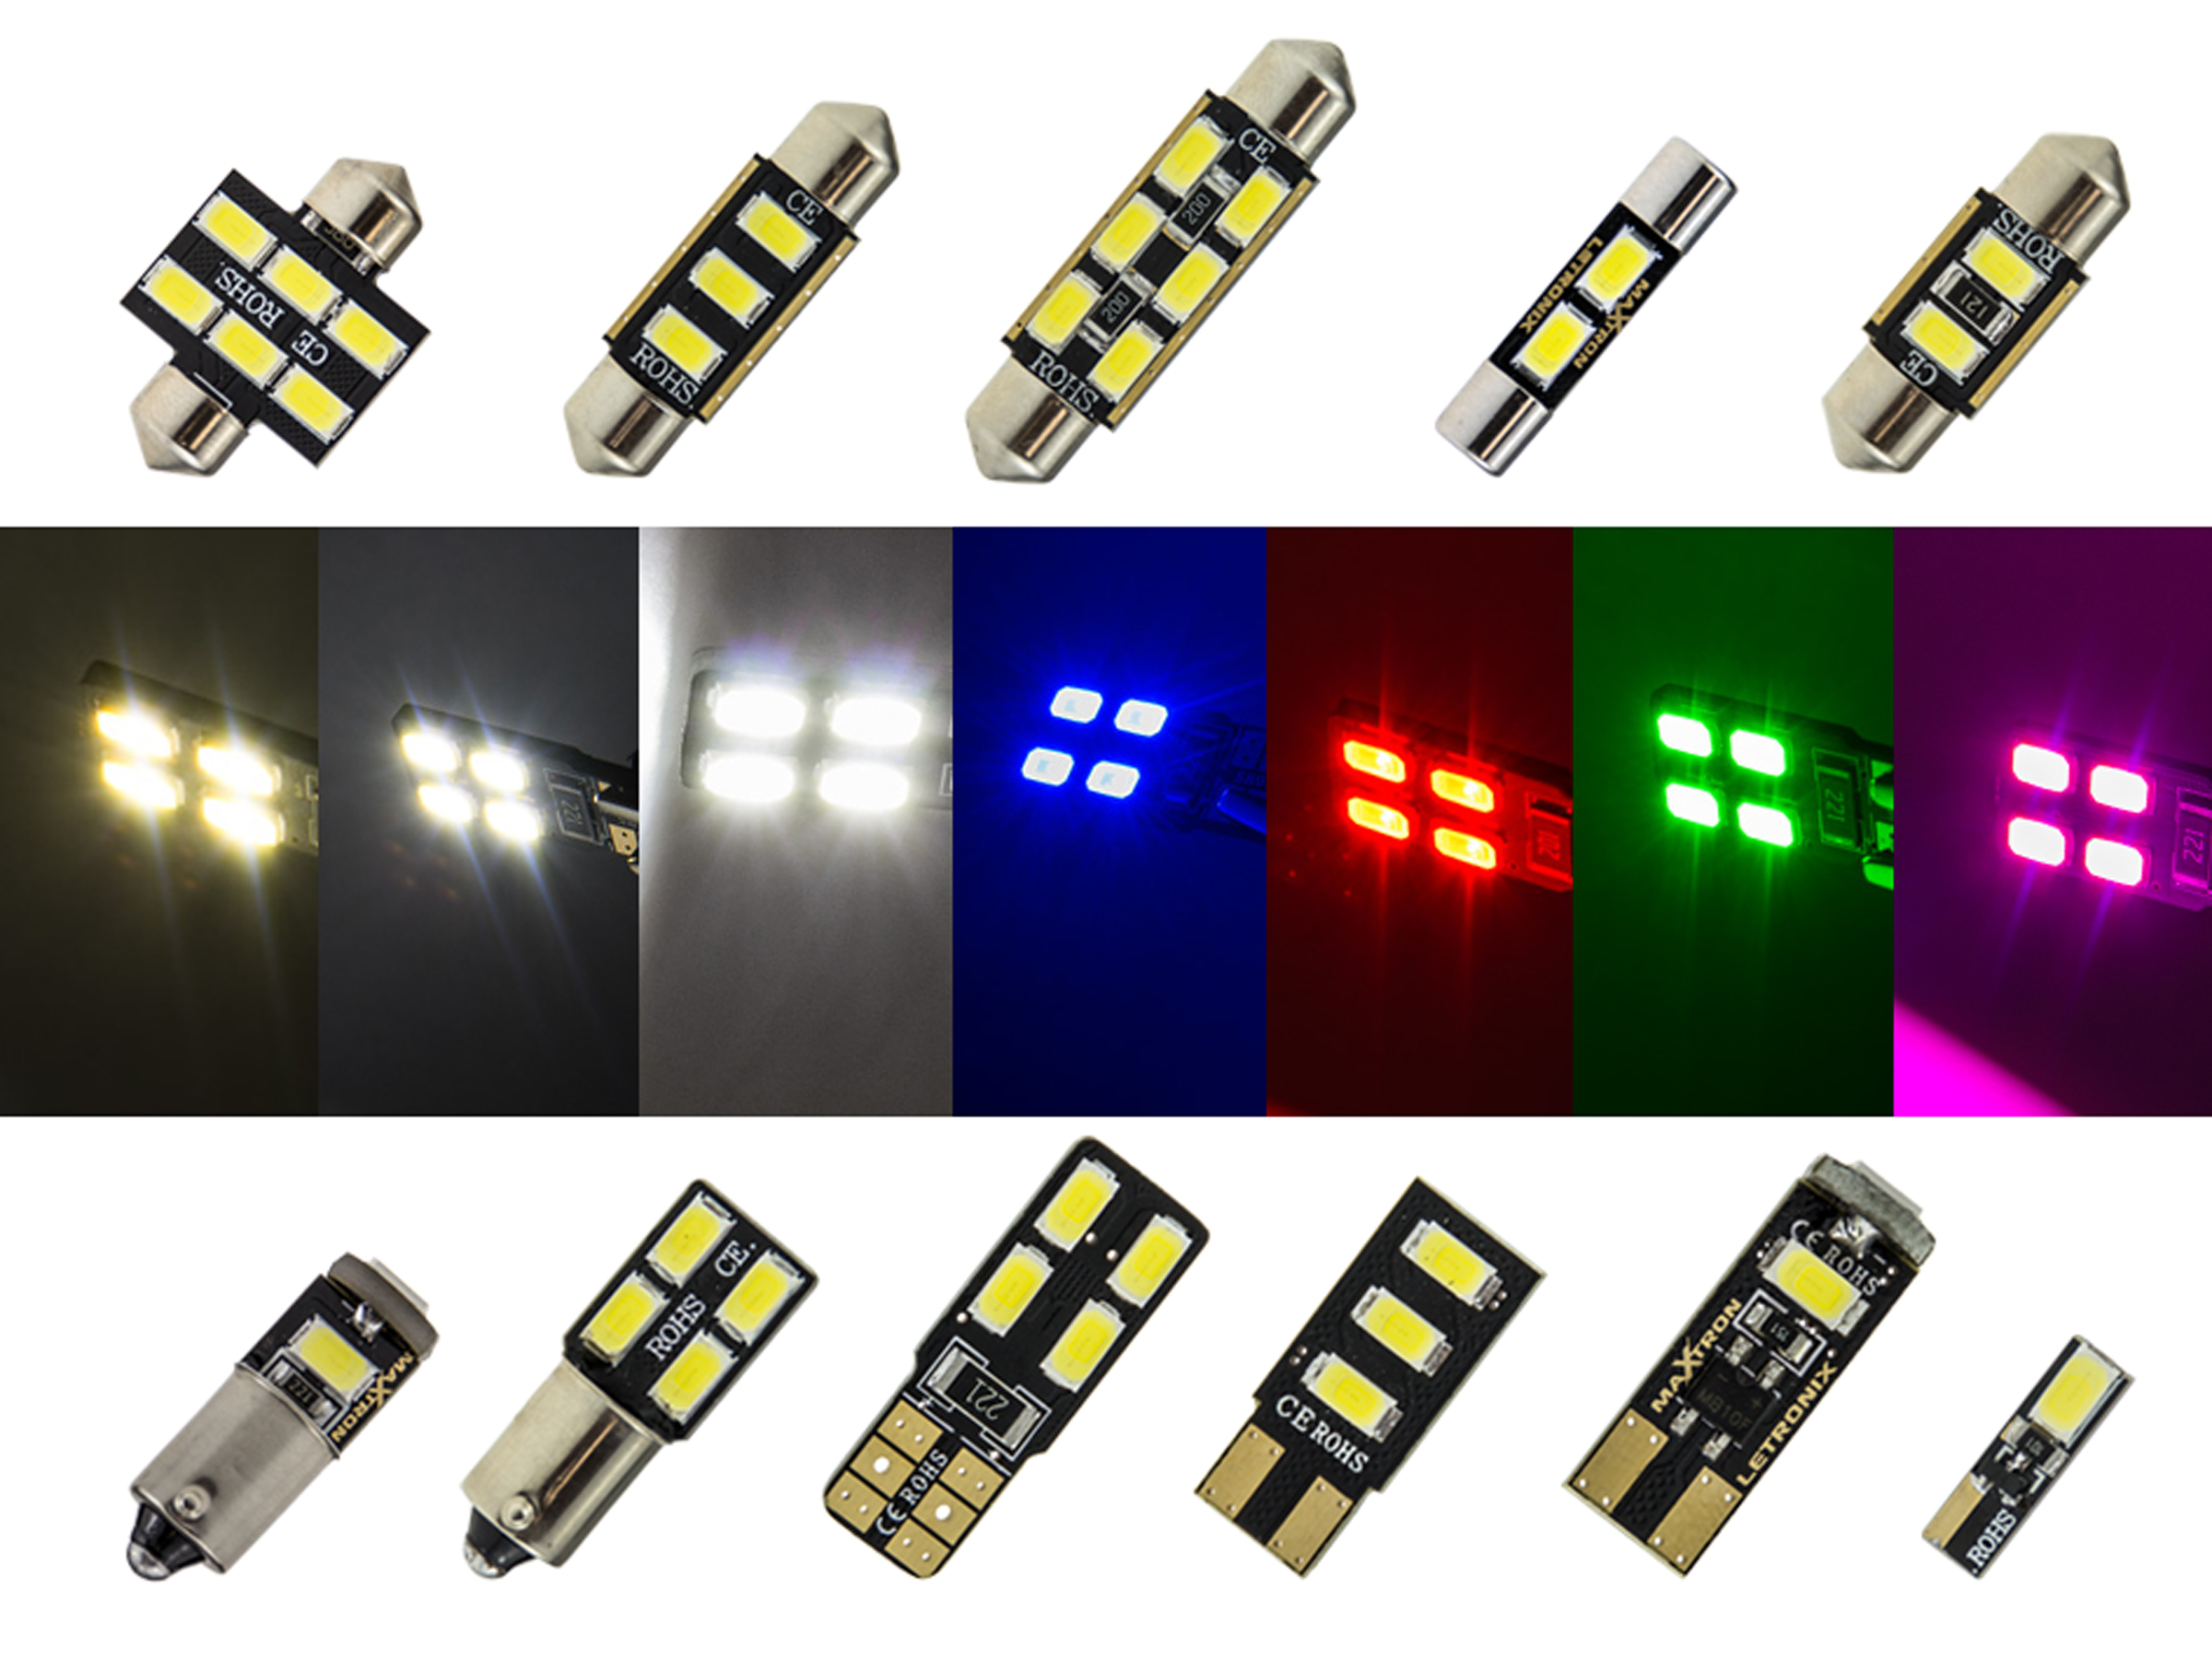 https://www.blauertacho4u.de/images/product_images/original_images/MaXtron---SMD-LED-Innenraumbeleuchtung-VW-Golf-5-Variant-mit-PD-Innenraumset55995332_2.jpg